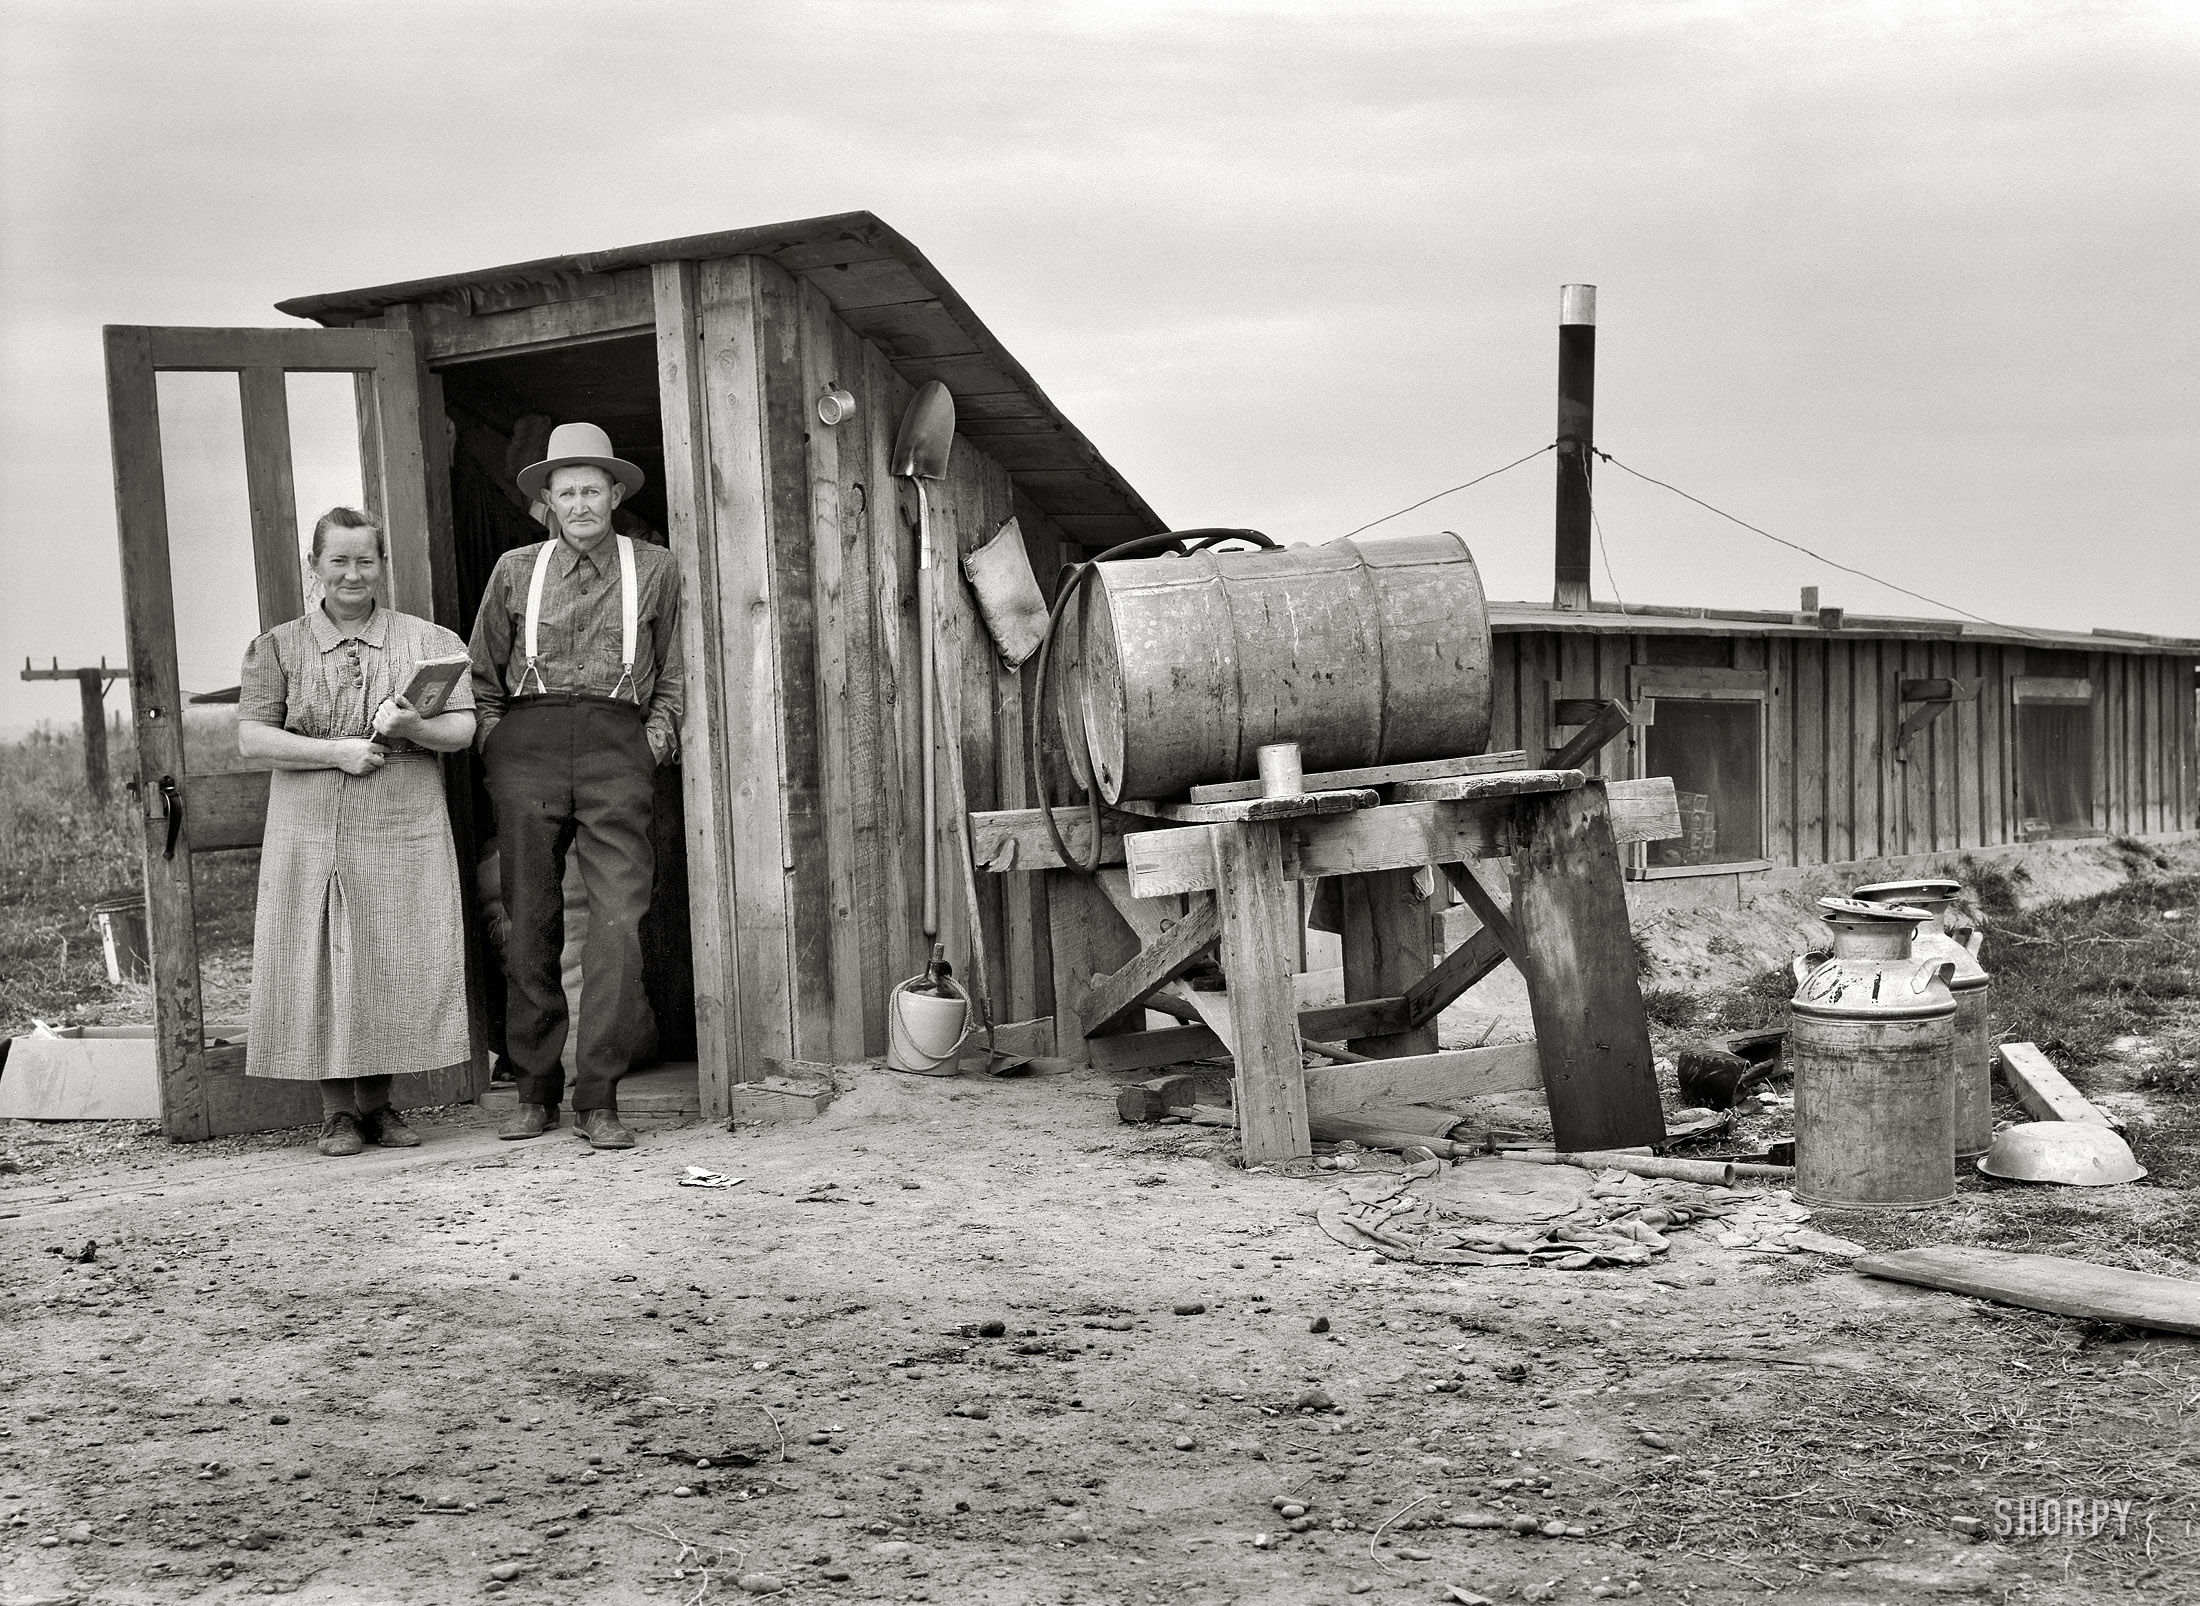 October 1939. "Mr. and Mrs. Wardlaw at entrance to their dugout basement home. Dead Ox Flat, Malheur County, Oregon." Medium-format nitrate negative by Dorothea Lange for the Resettlement Administration. View full size.